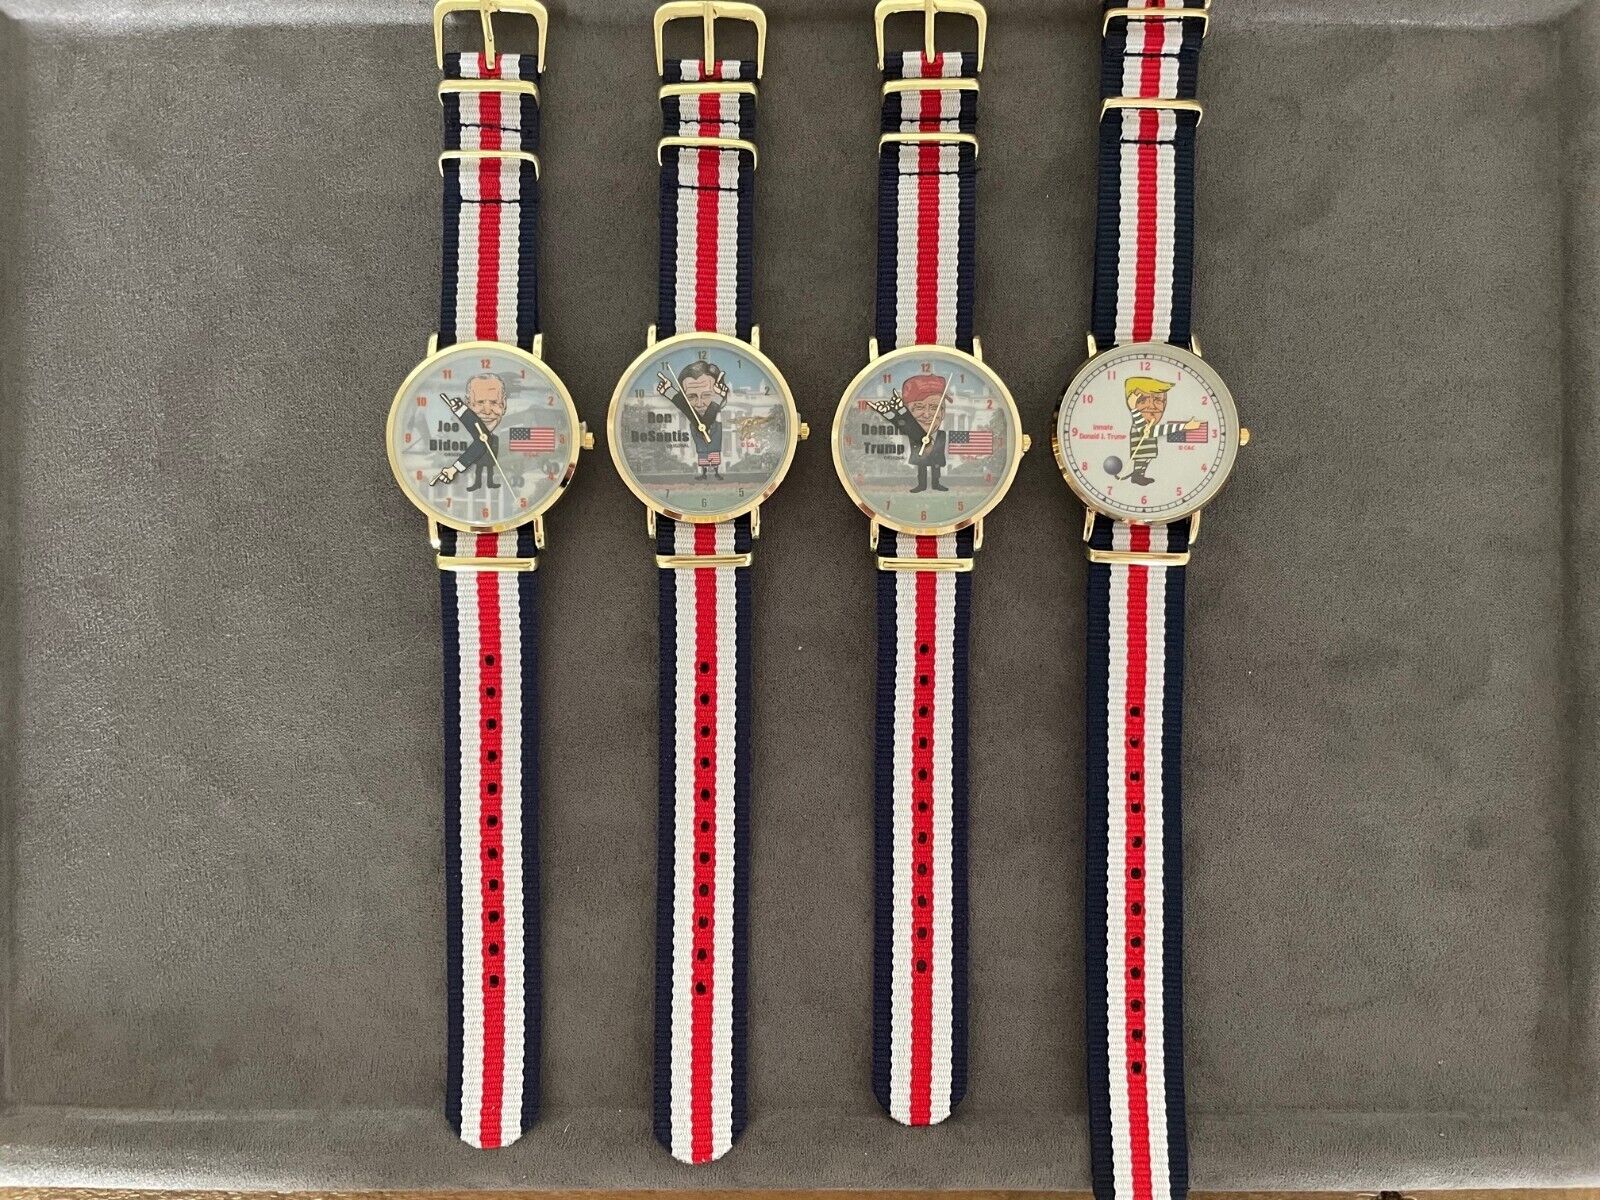 Lot of Four (4) Collectible Caricature Watches - Trump, Biden and DeSantis